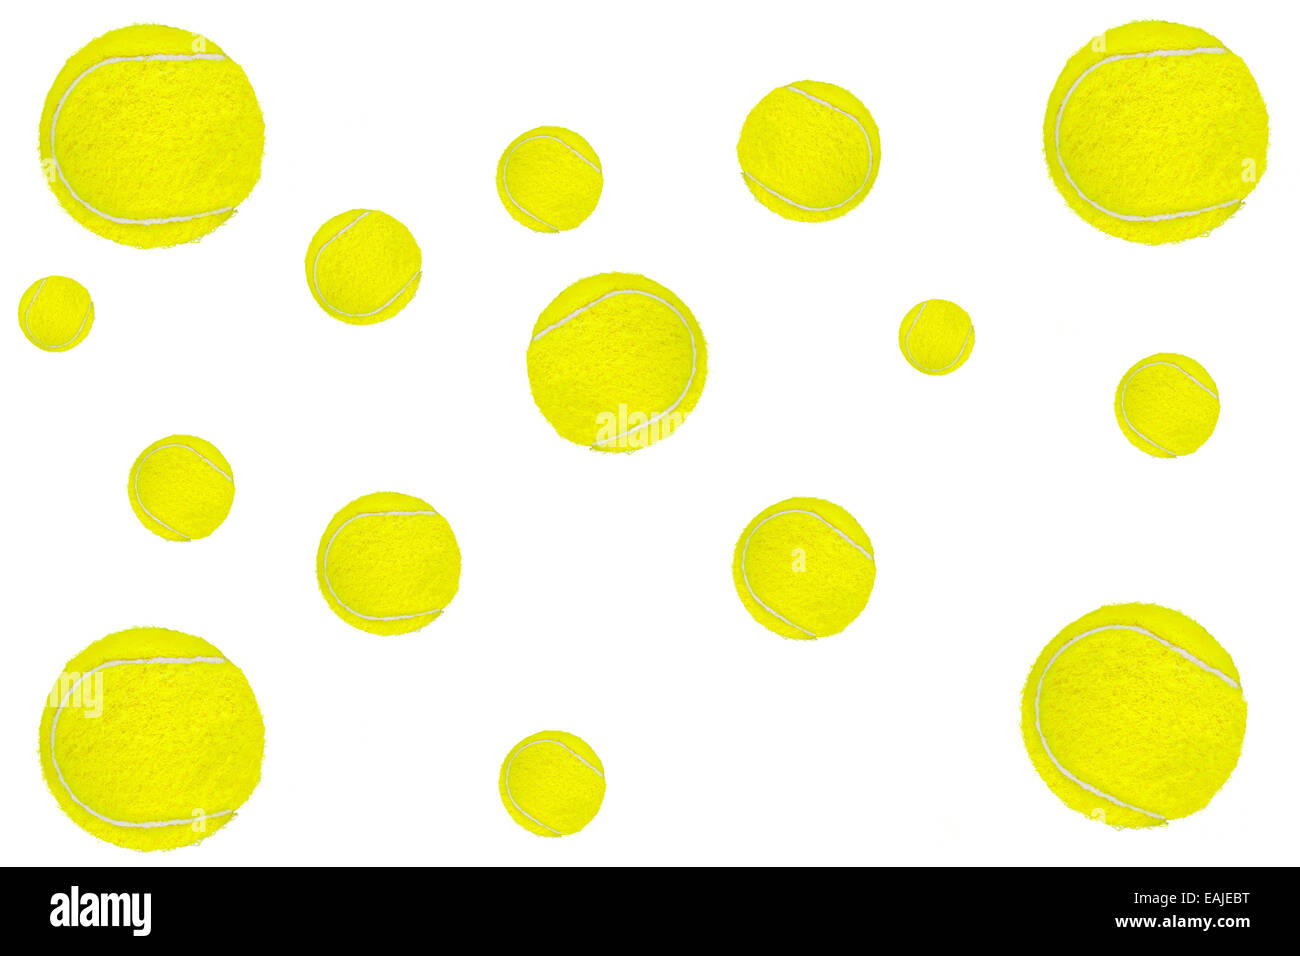 Background made of tennis balls on white. Stock Photo